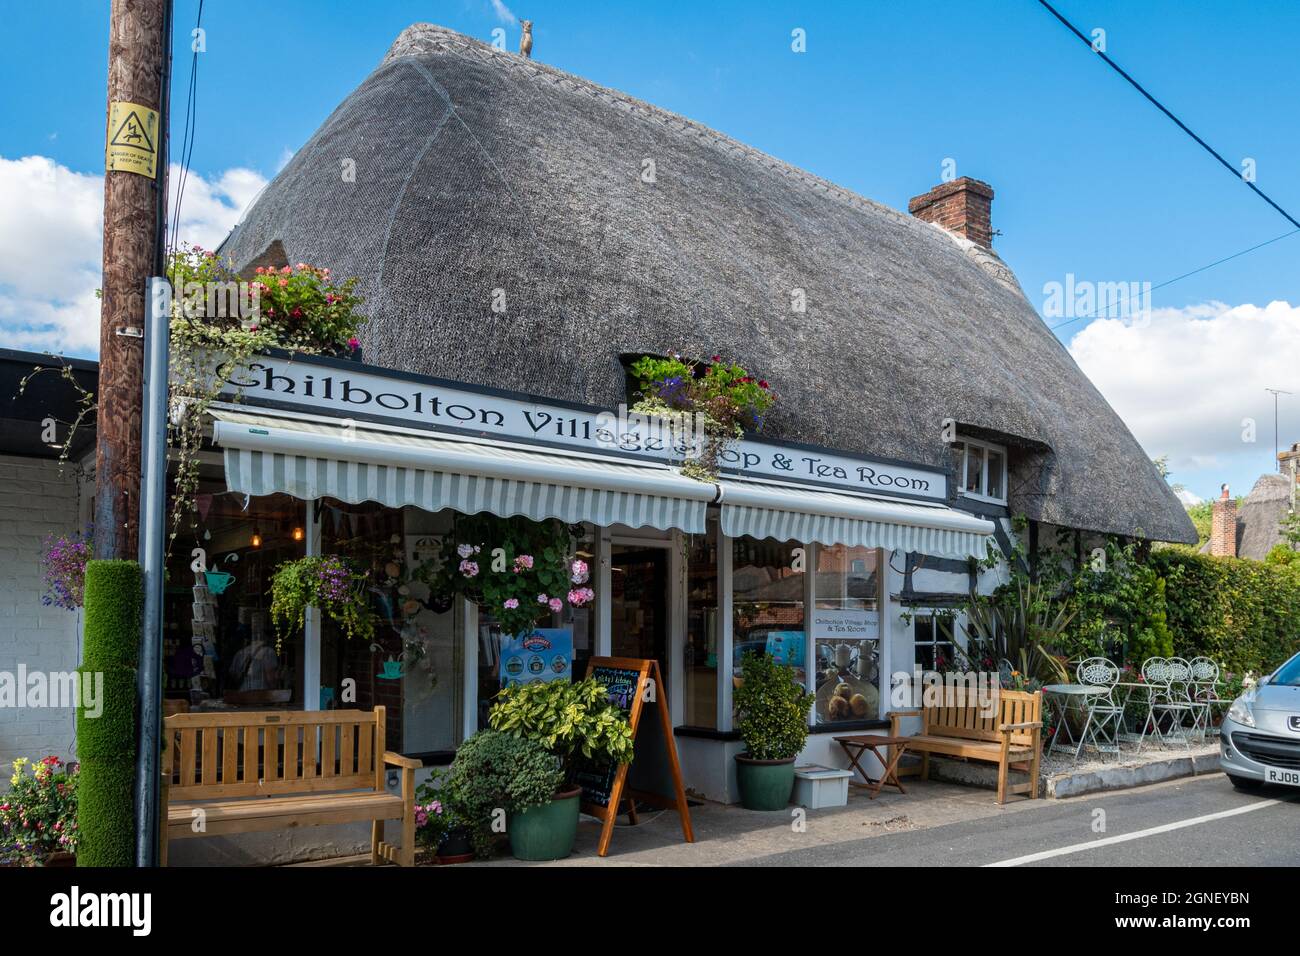 Chilbolton Village Shop and Tea Room, small business in a traditional thatched cottage building, Chilbolton, Hampshire, England, UK Stock Photo